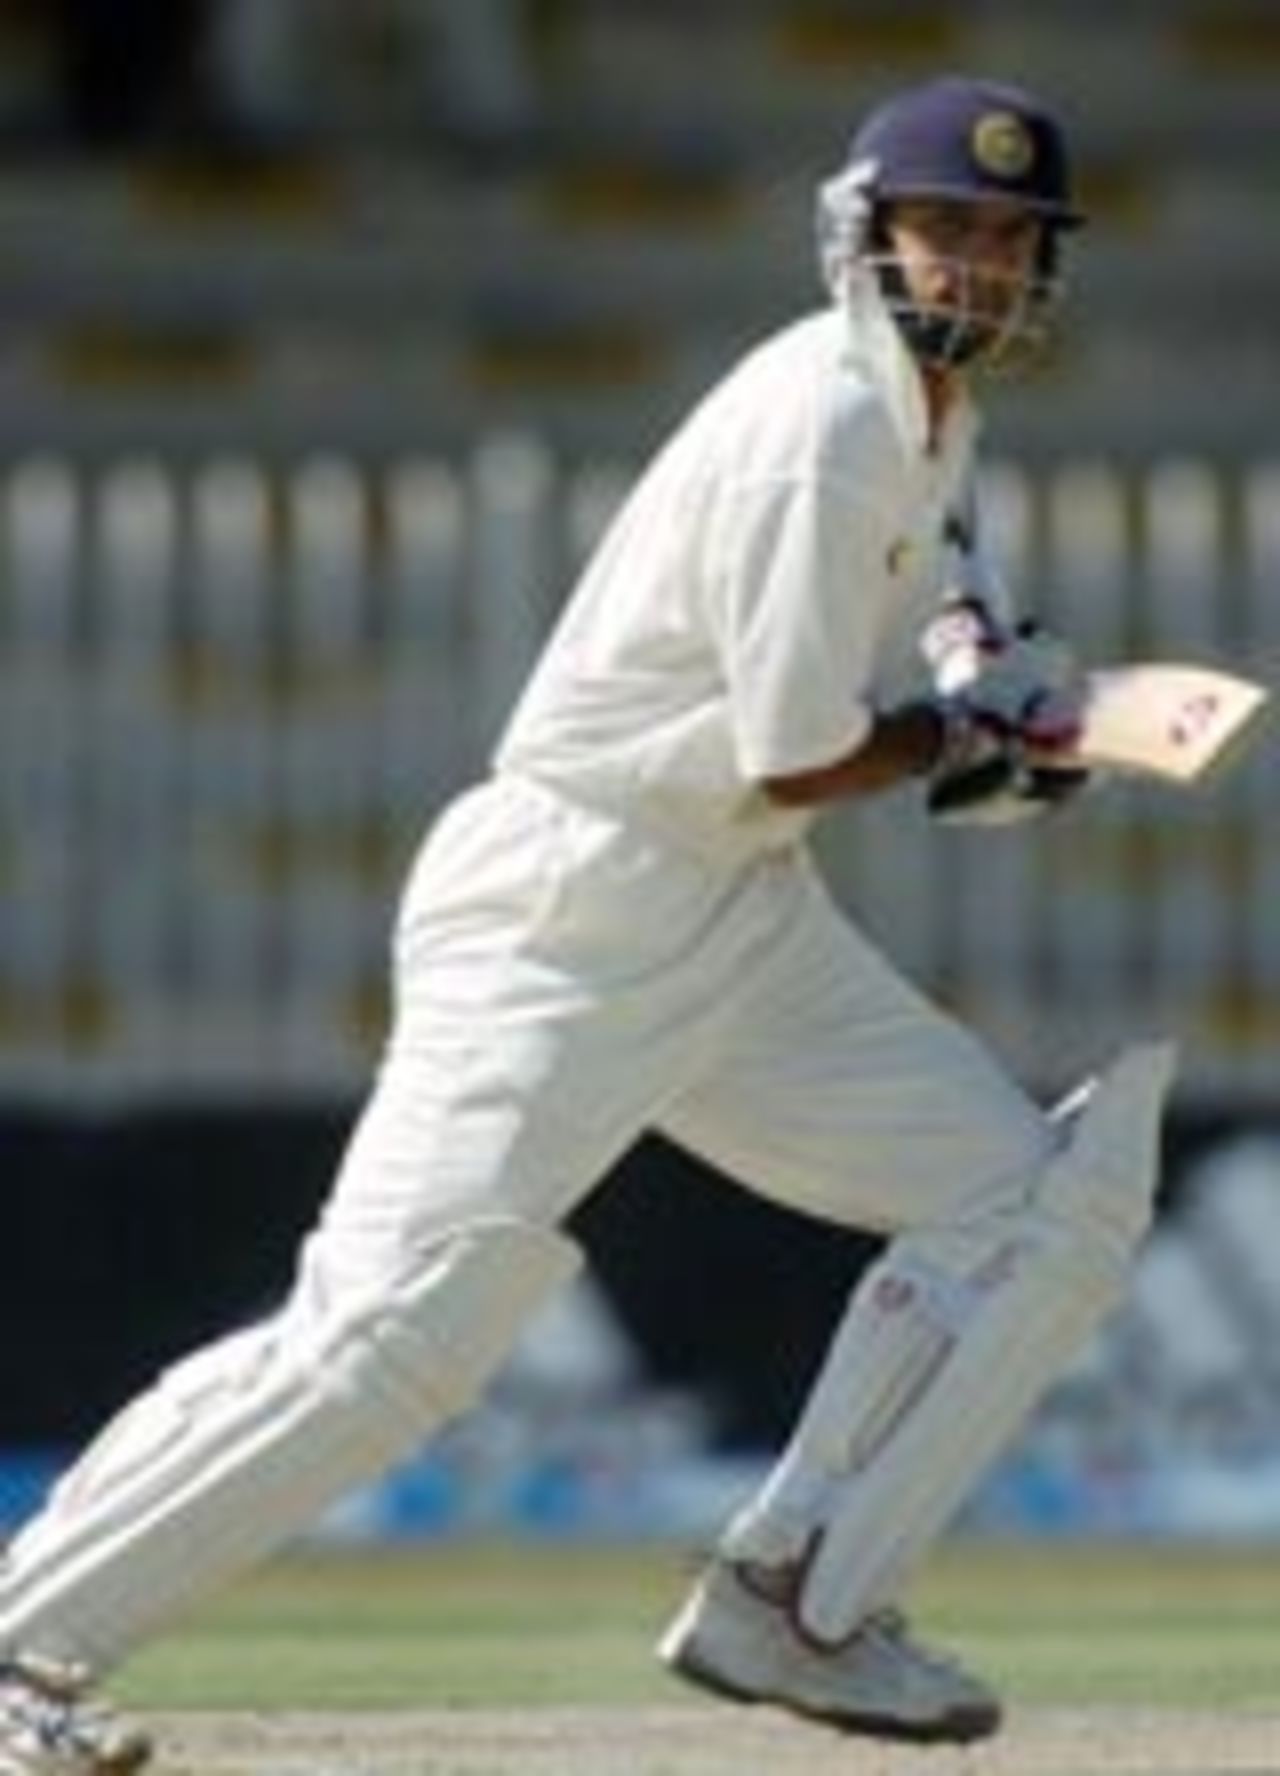 Rahul Dravid squeezes one on the off side on the way to his 270, Pakistan v India, 3rd Test, Rawalpindi, 3rd day, April 15, 2004